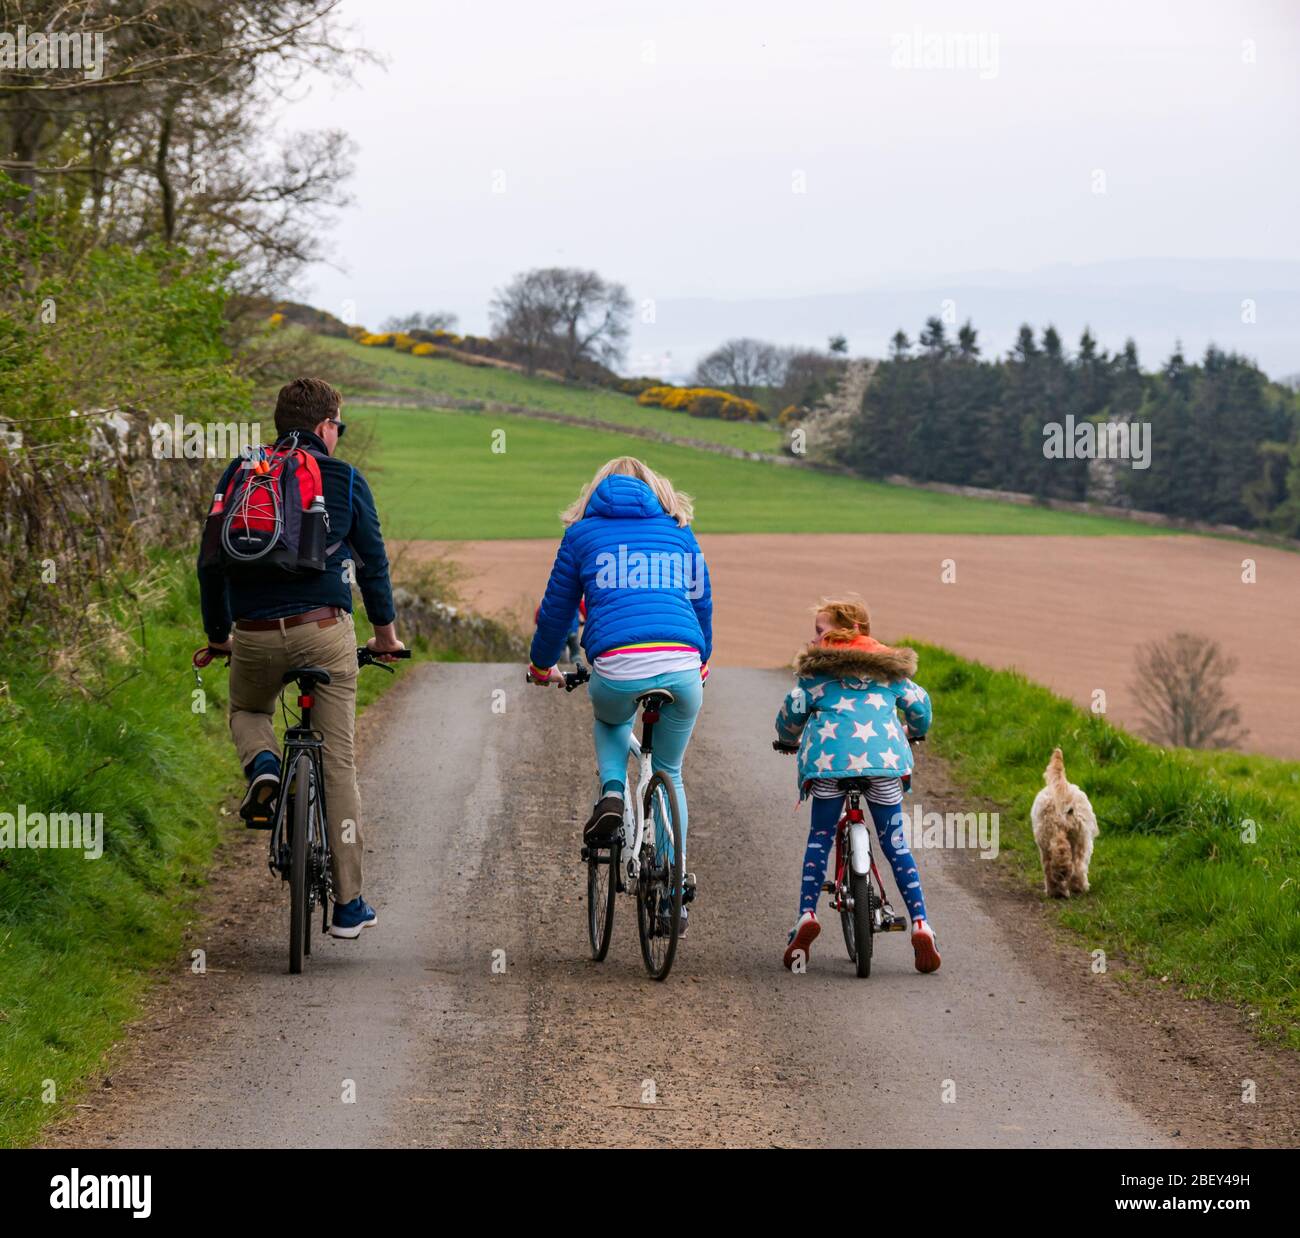 Family cycling on country lane during Covid-19 Coronavirus pandemic for daily exercise, East Lothian, Scotland, UK Stock Photo